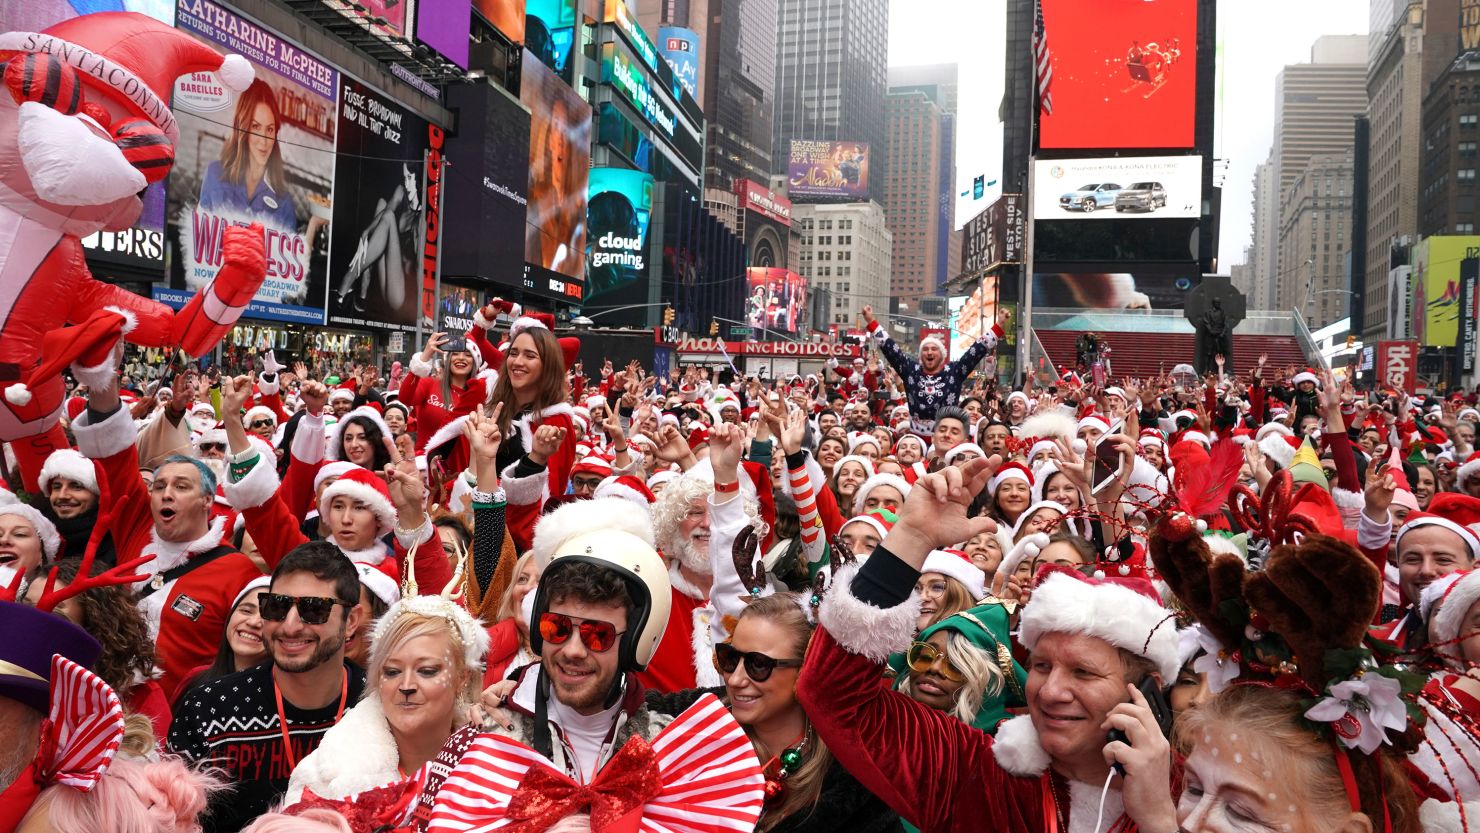 Revelers gather at the start of the SantaCon bar crawl at Father Duffy Square, a section of Times Square, on December 14, 2019.